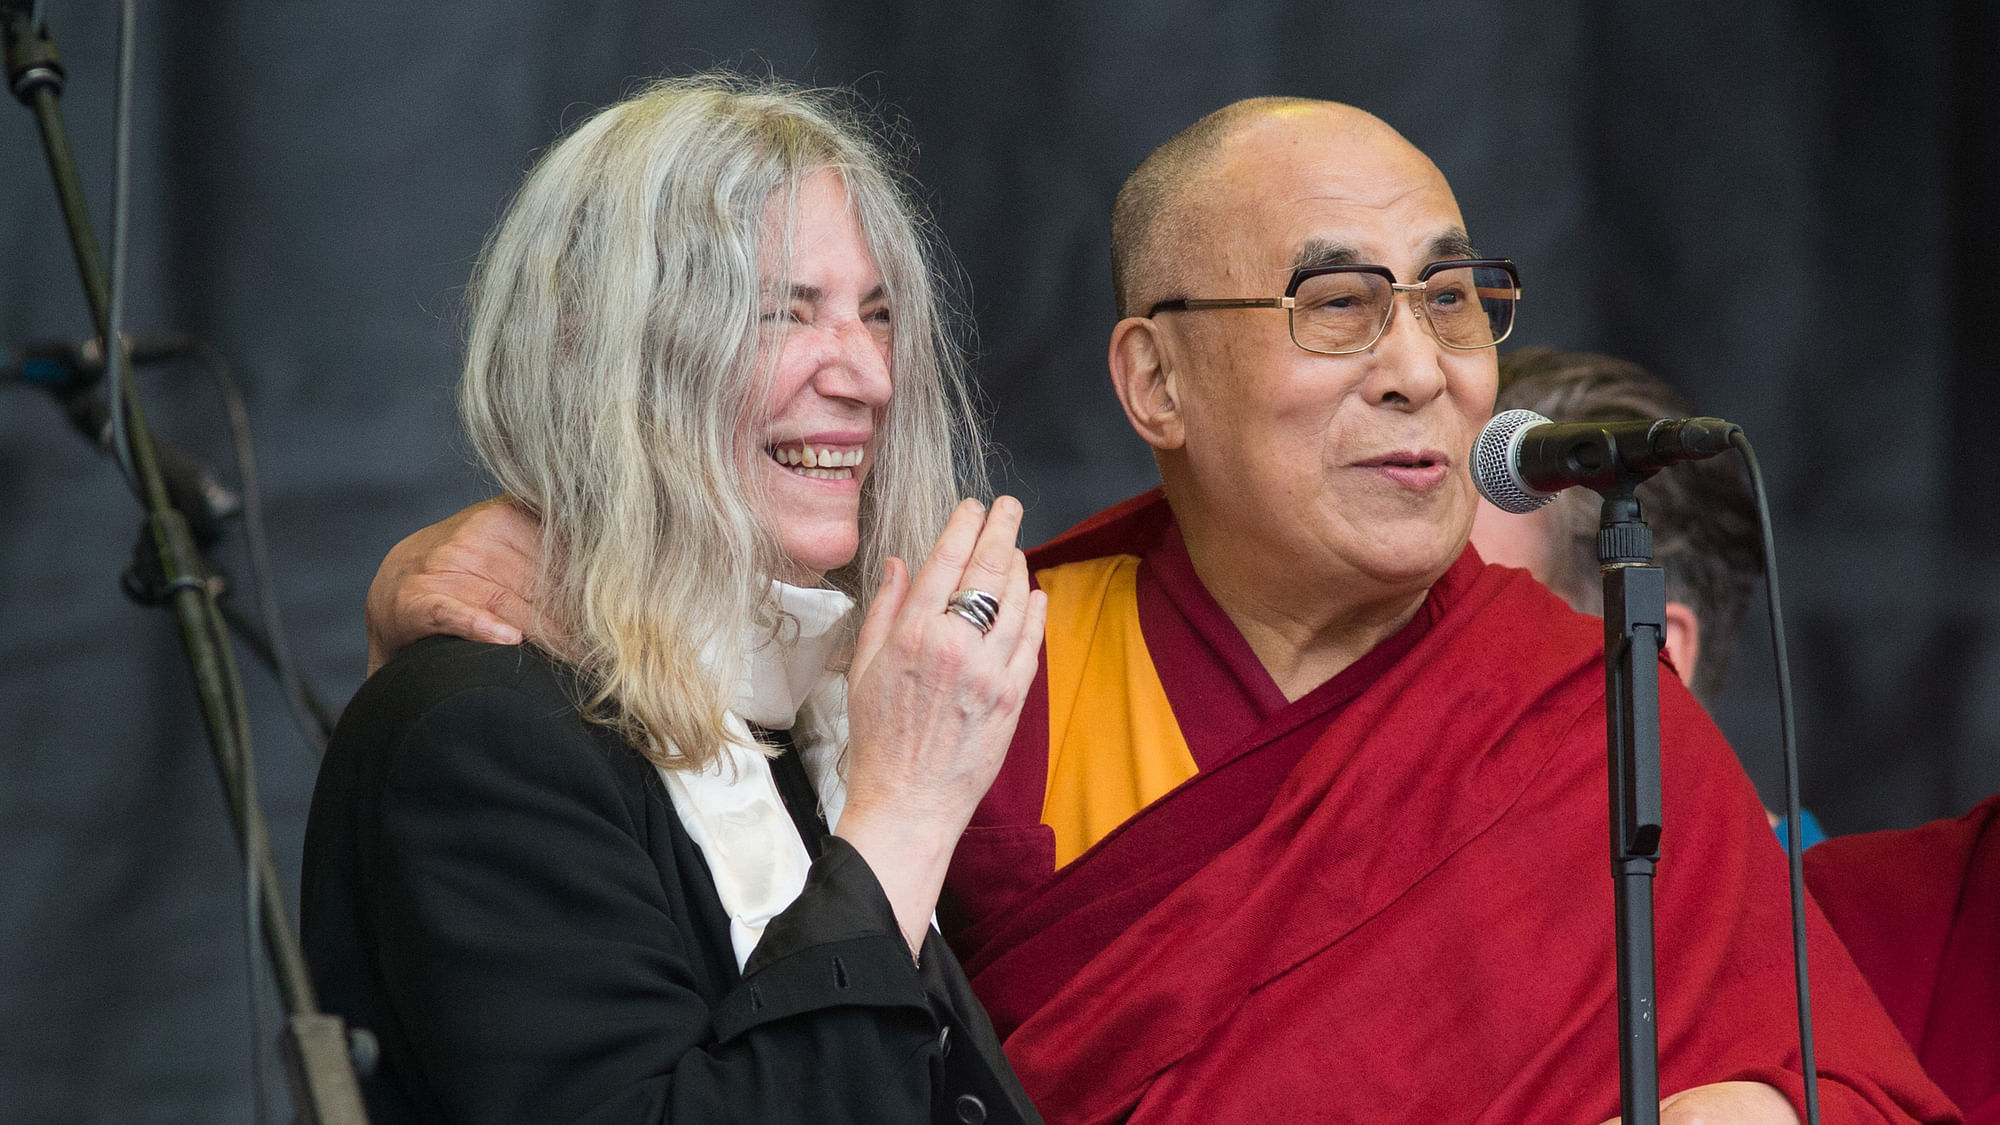 The Dalai Lama speaks to the crowd during singer Patti Smith’s, left, performance at the Glastonbury music festival. (Photo: AP)